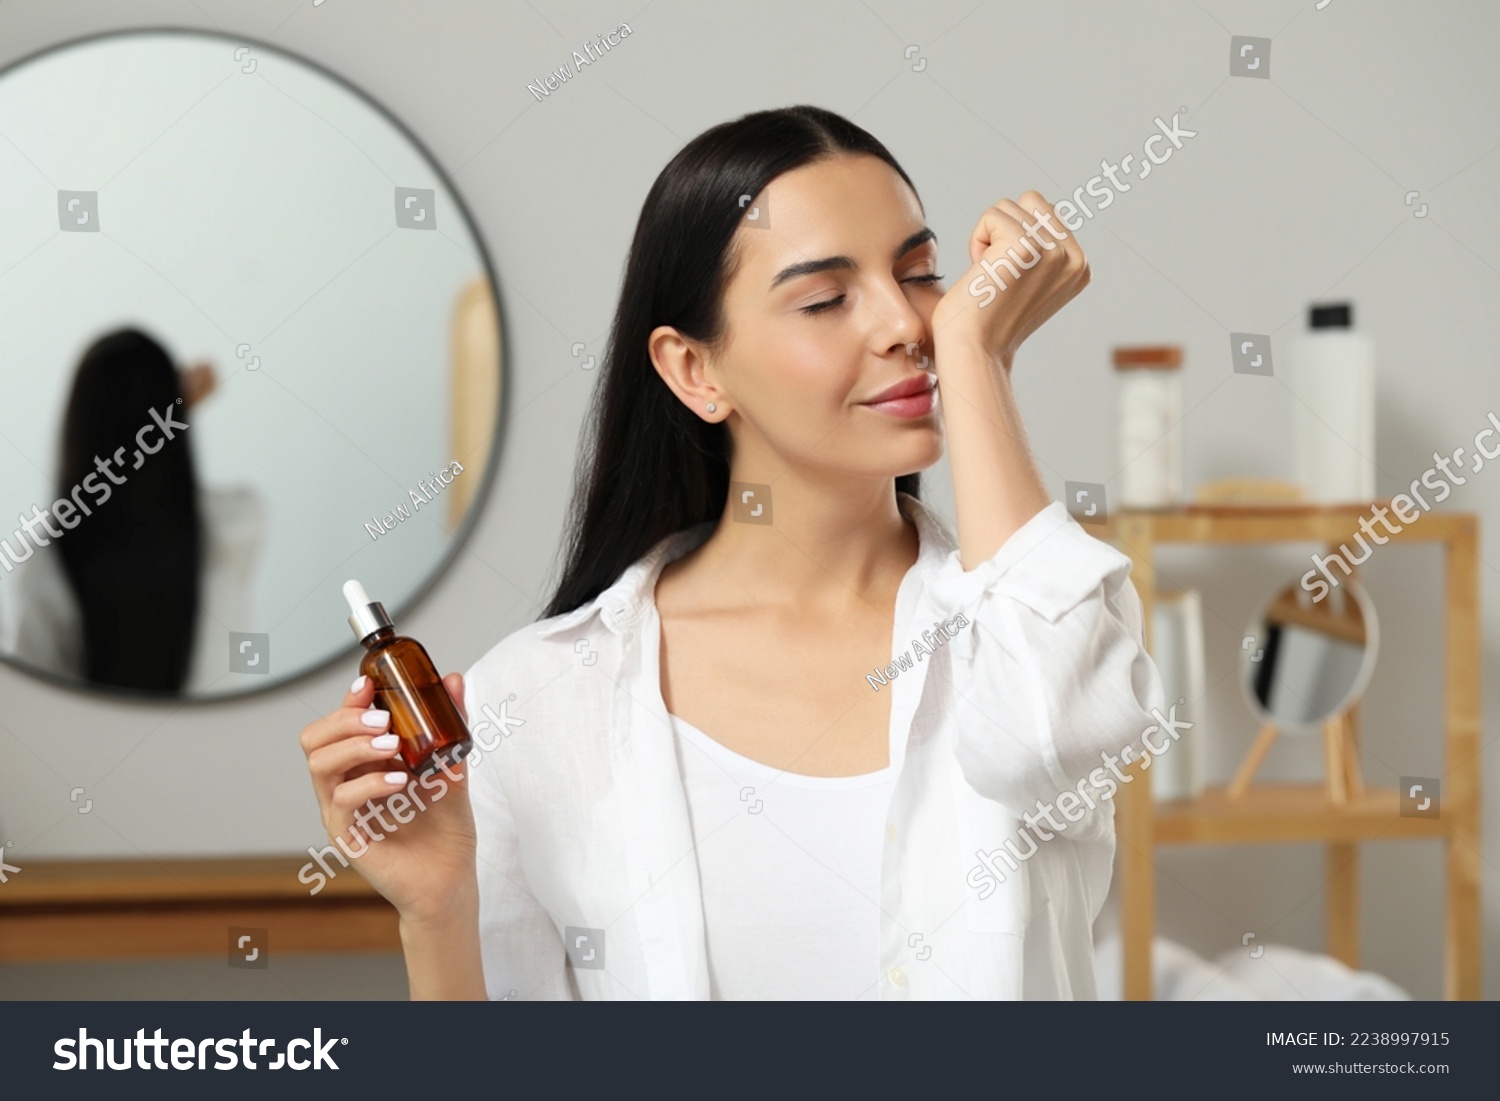 Young woman smelling essential oil on wrist indoors #2238997915